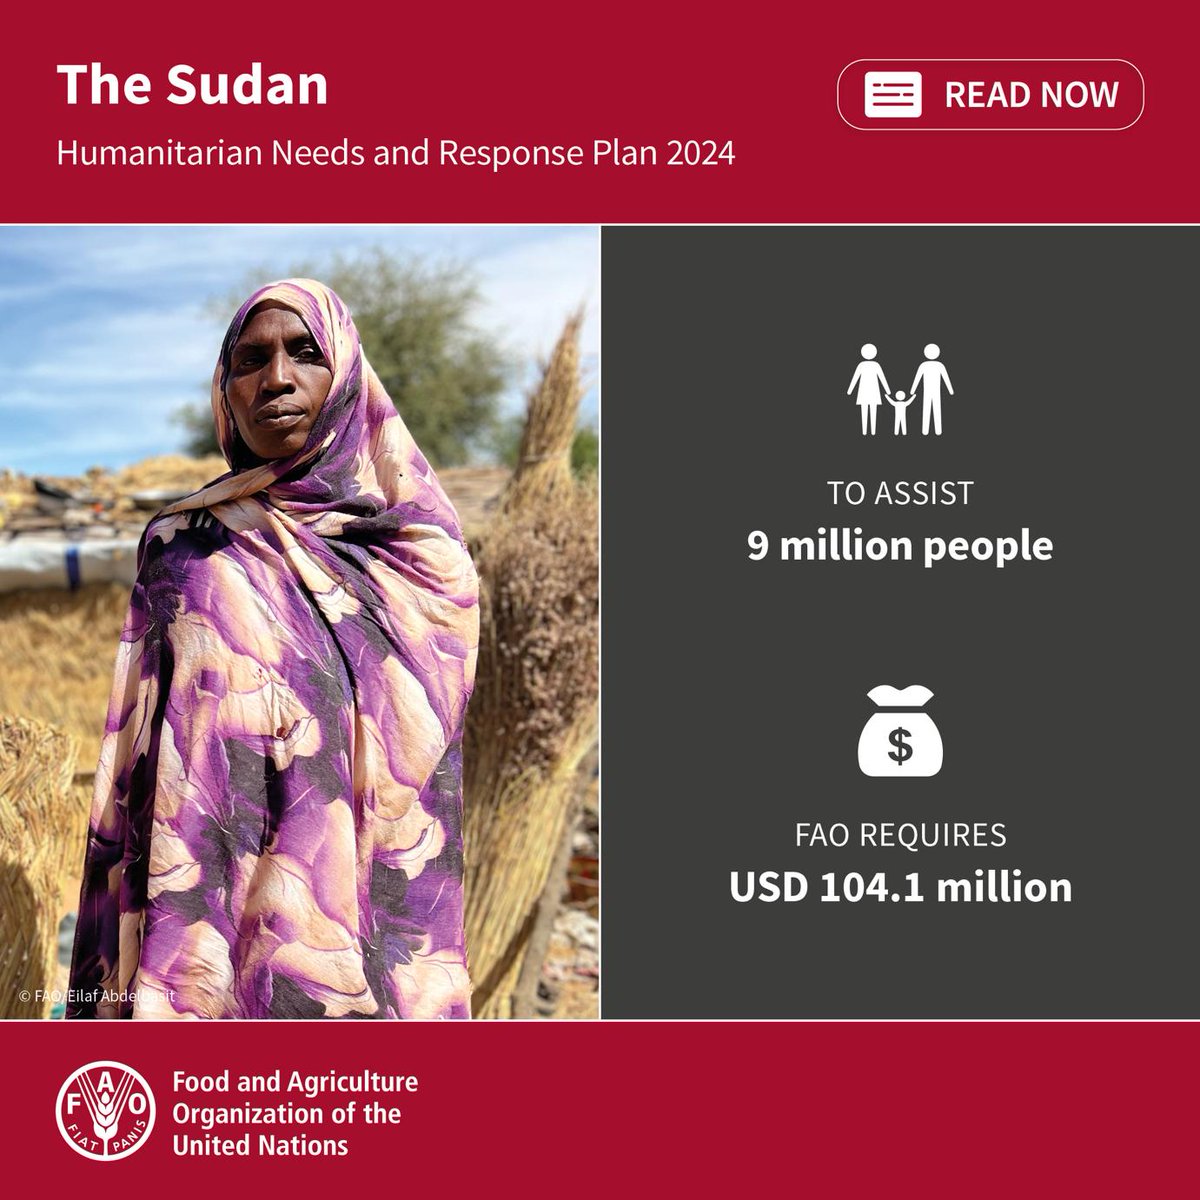 Sudan is facing unprecedented humanitarian crisis. As intense conflict/economic decline limit food access, restoring crop & livestock production—essential for 2/3 of the population—is a top priority. @FAO needs $104.1 million assist to 9 million people bit.ly/3VbSLrY